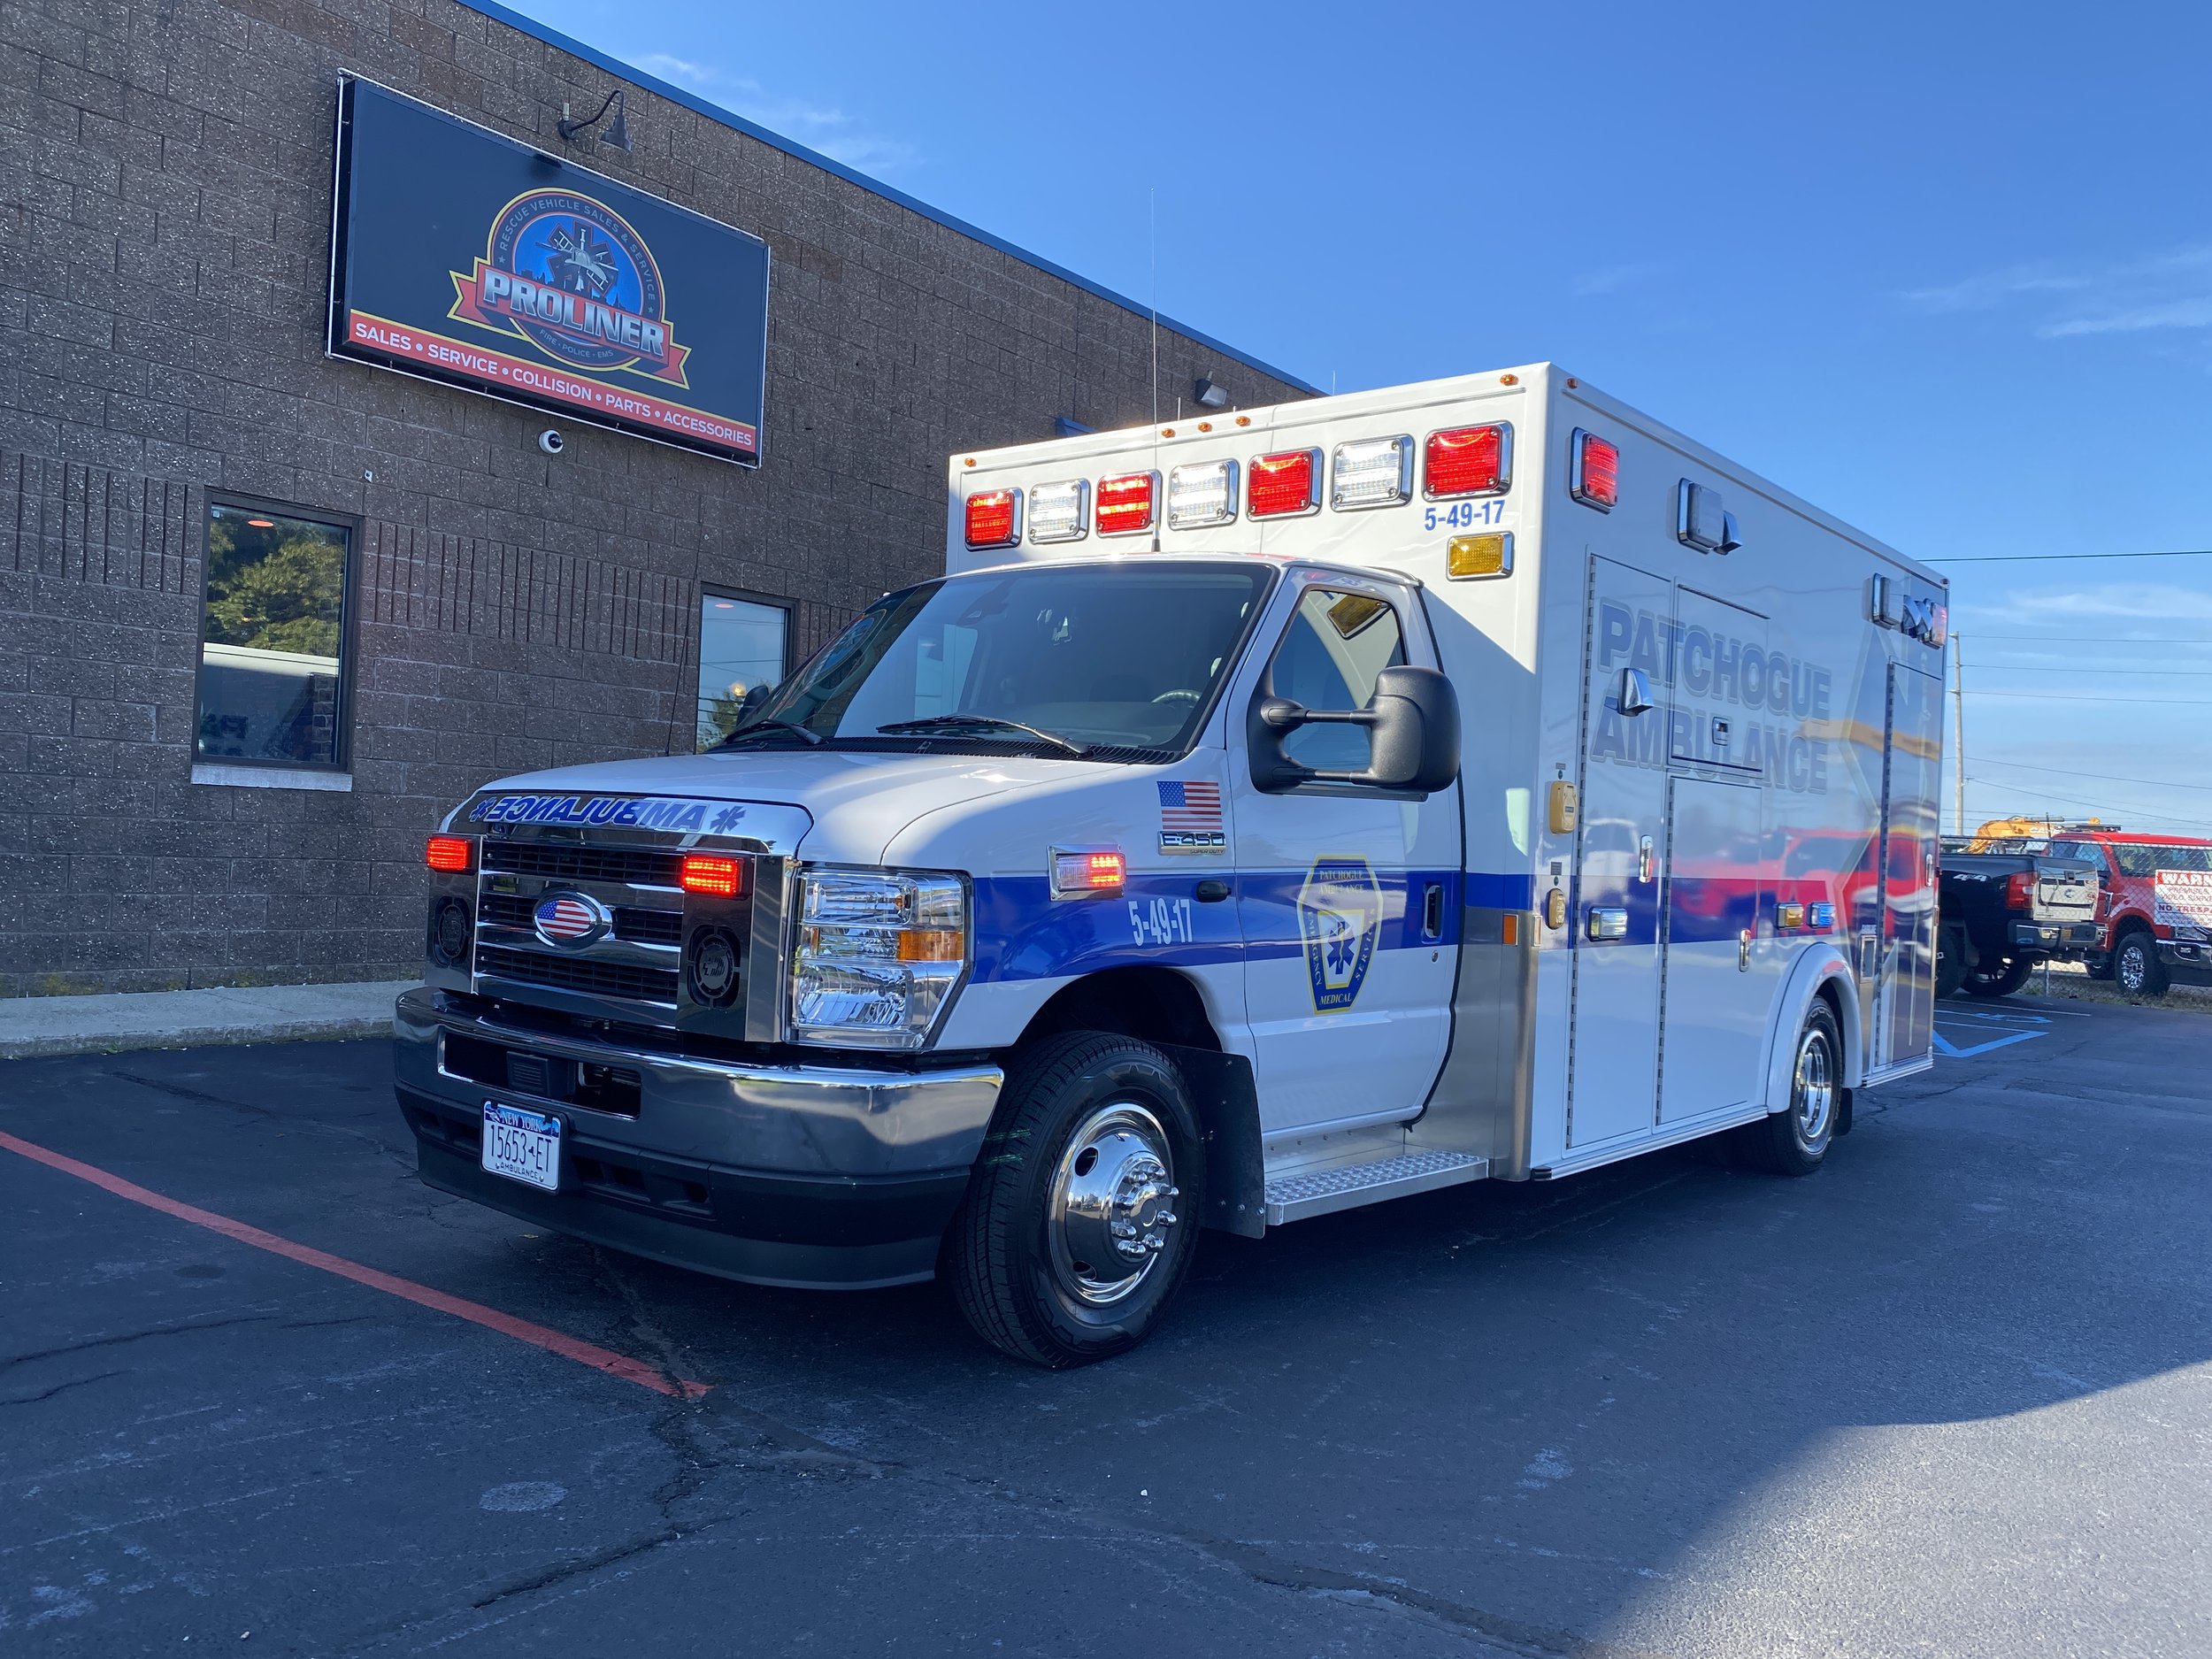 Patchogue Ambulance NEW Demers — Proliner Rescue